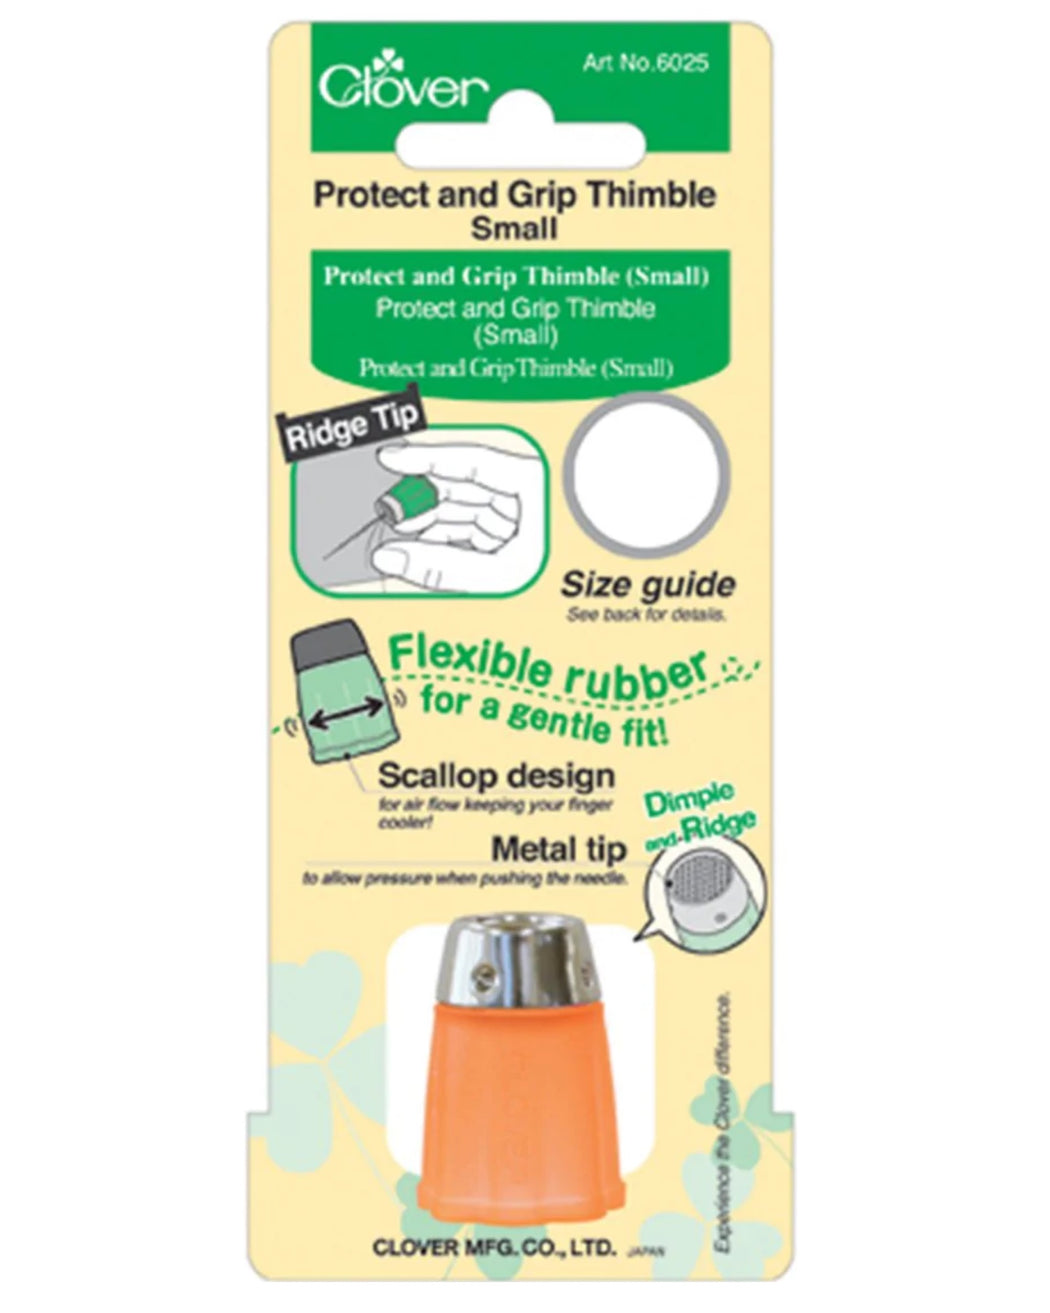 Protect and Grip Thimbles - Zipper and Thread